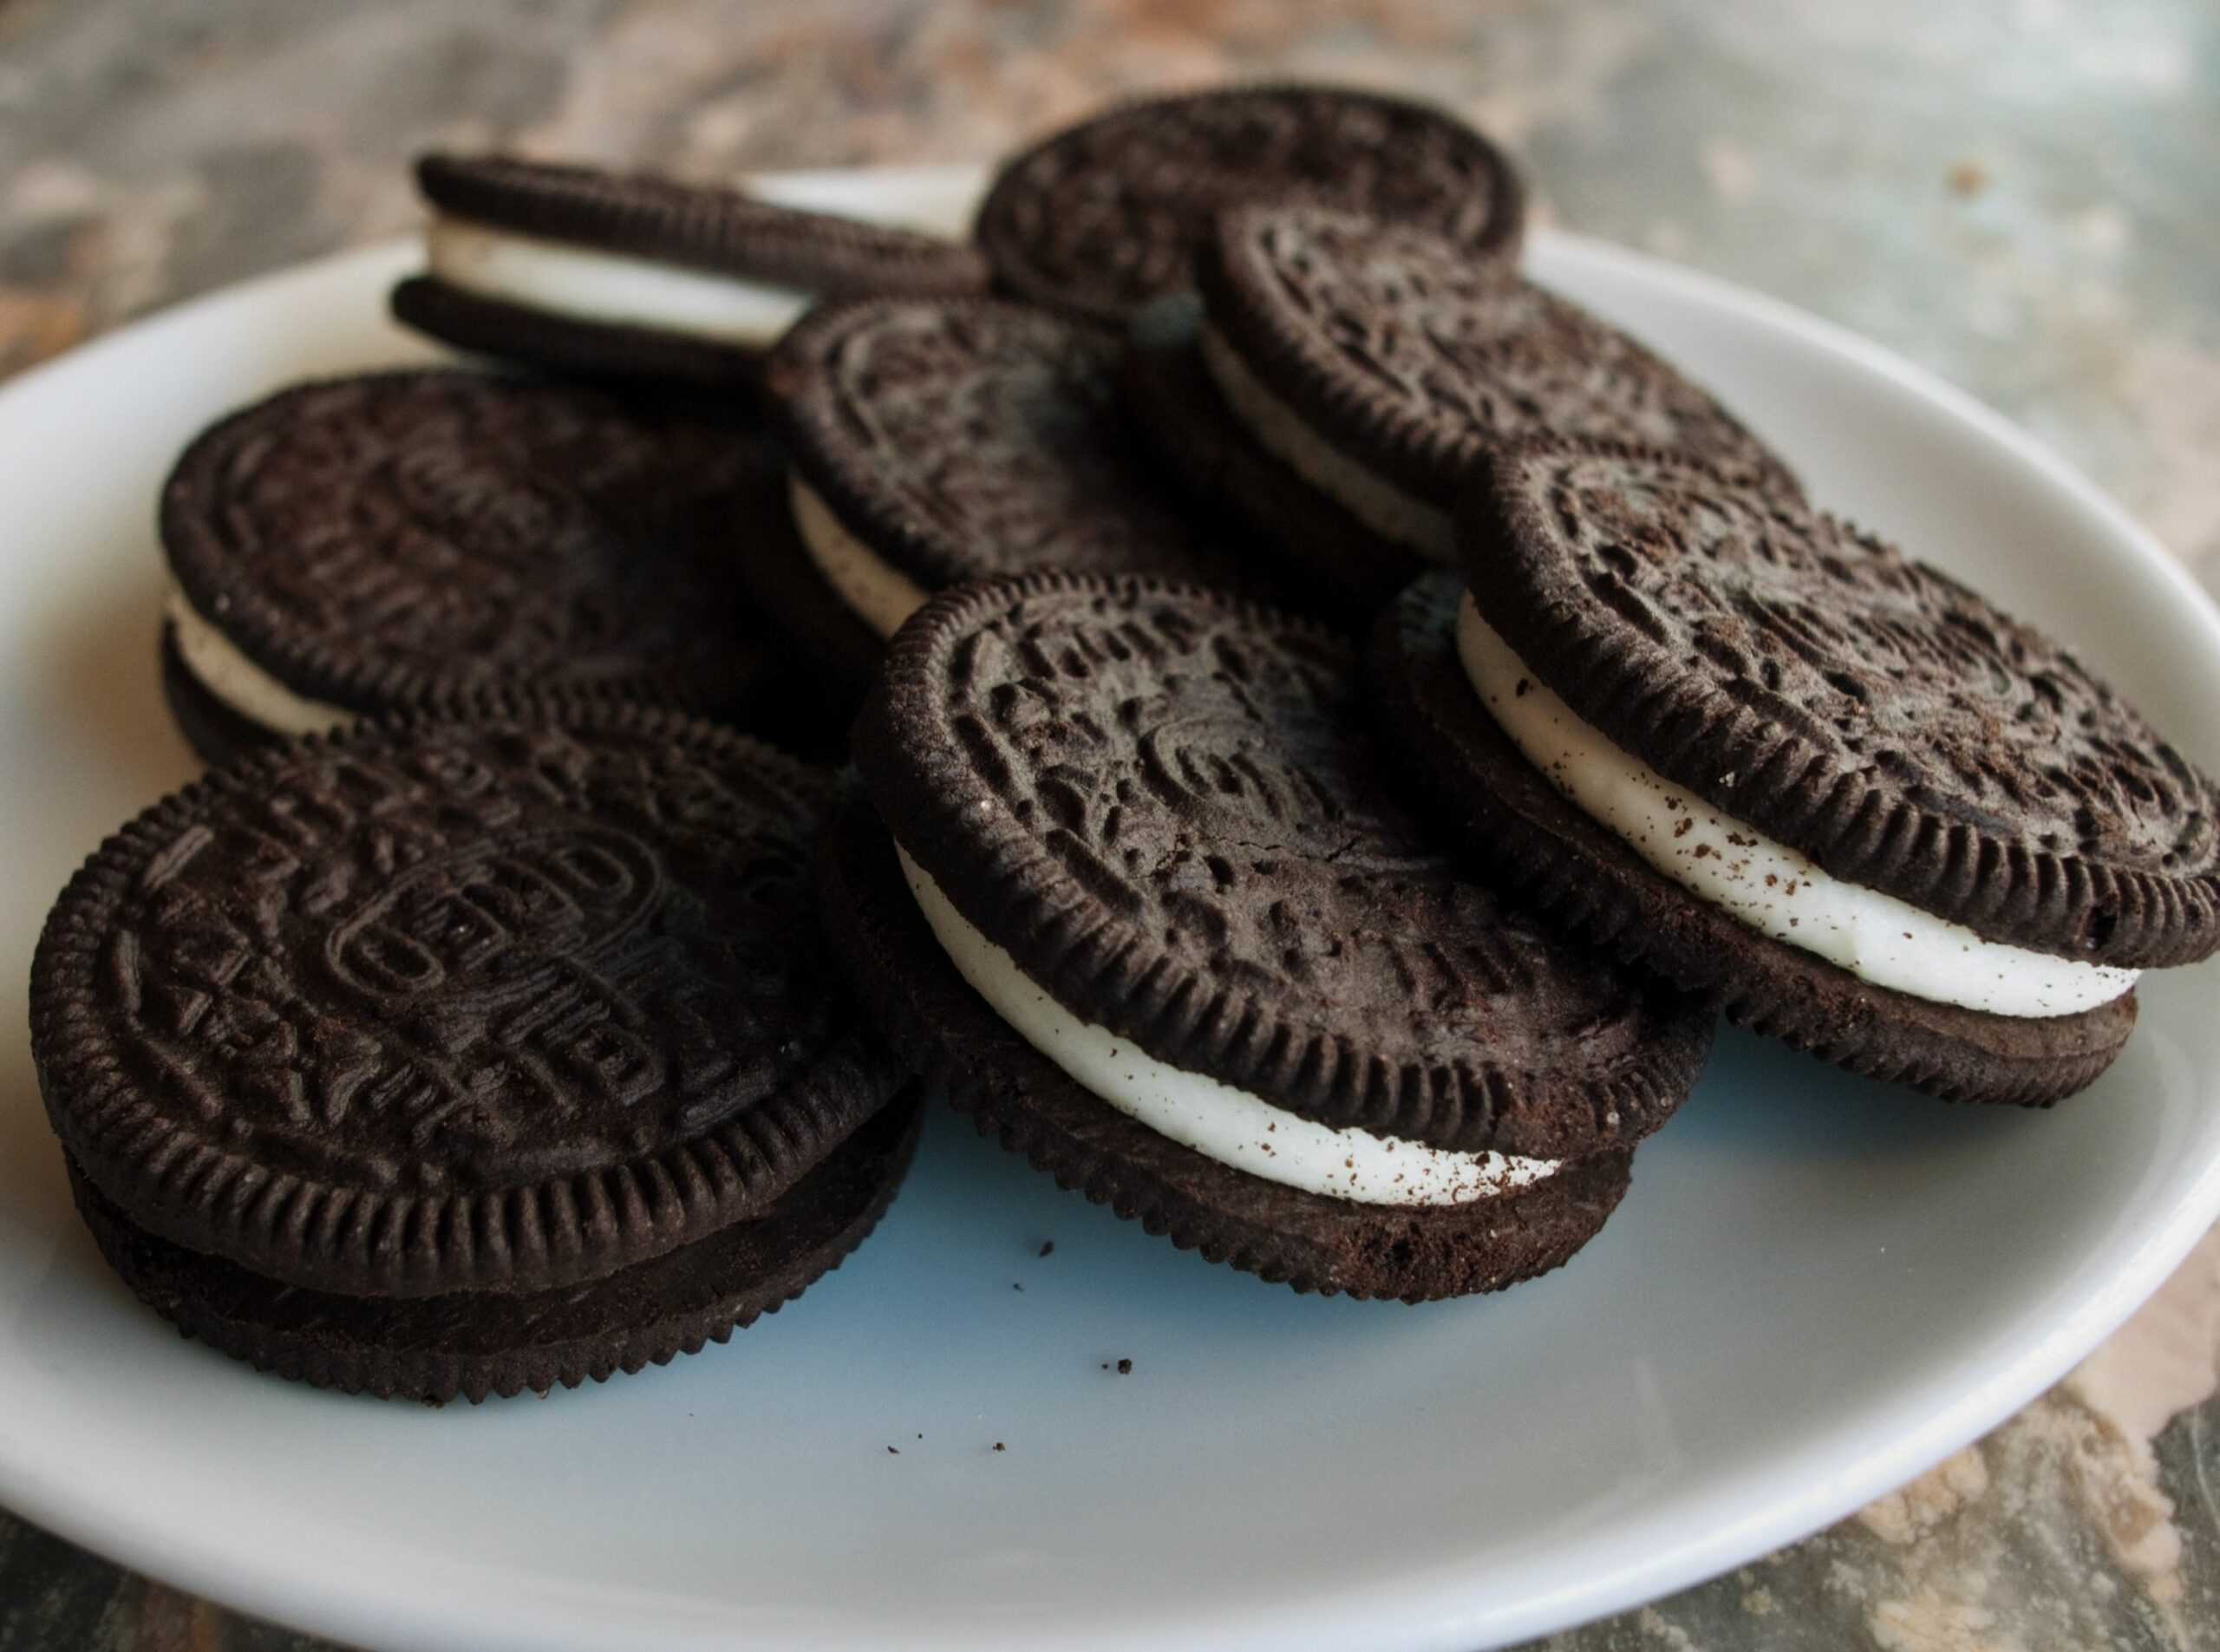 What are Oreo Cakesters made out of?